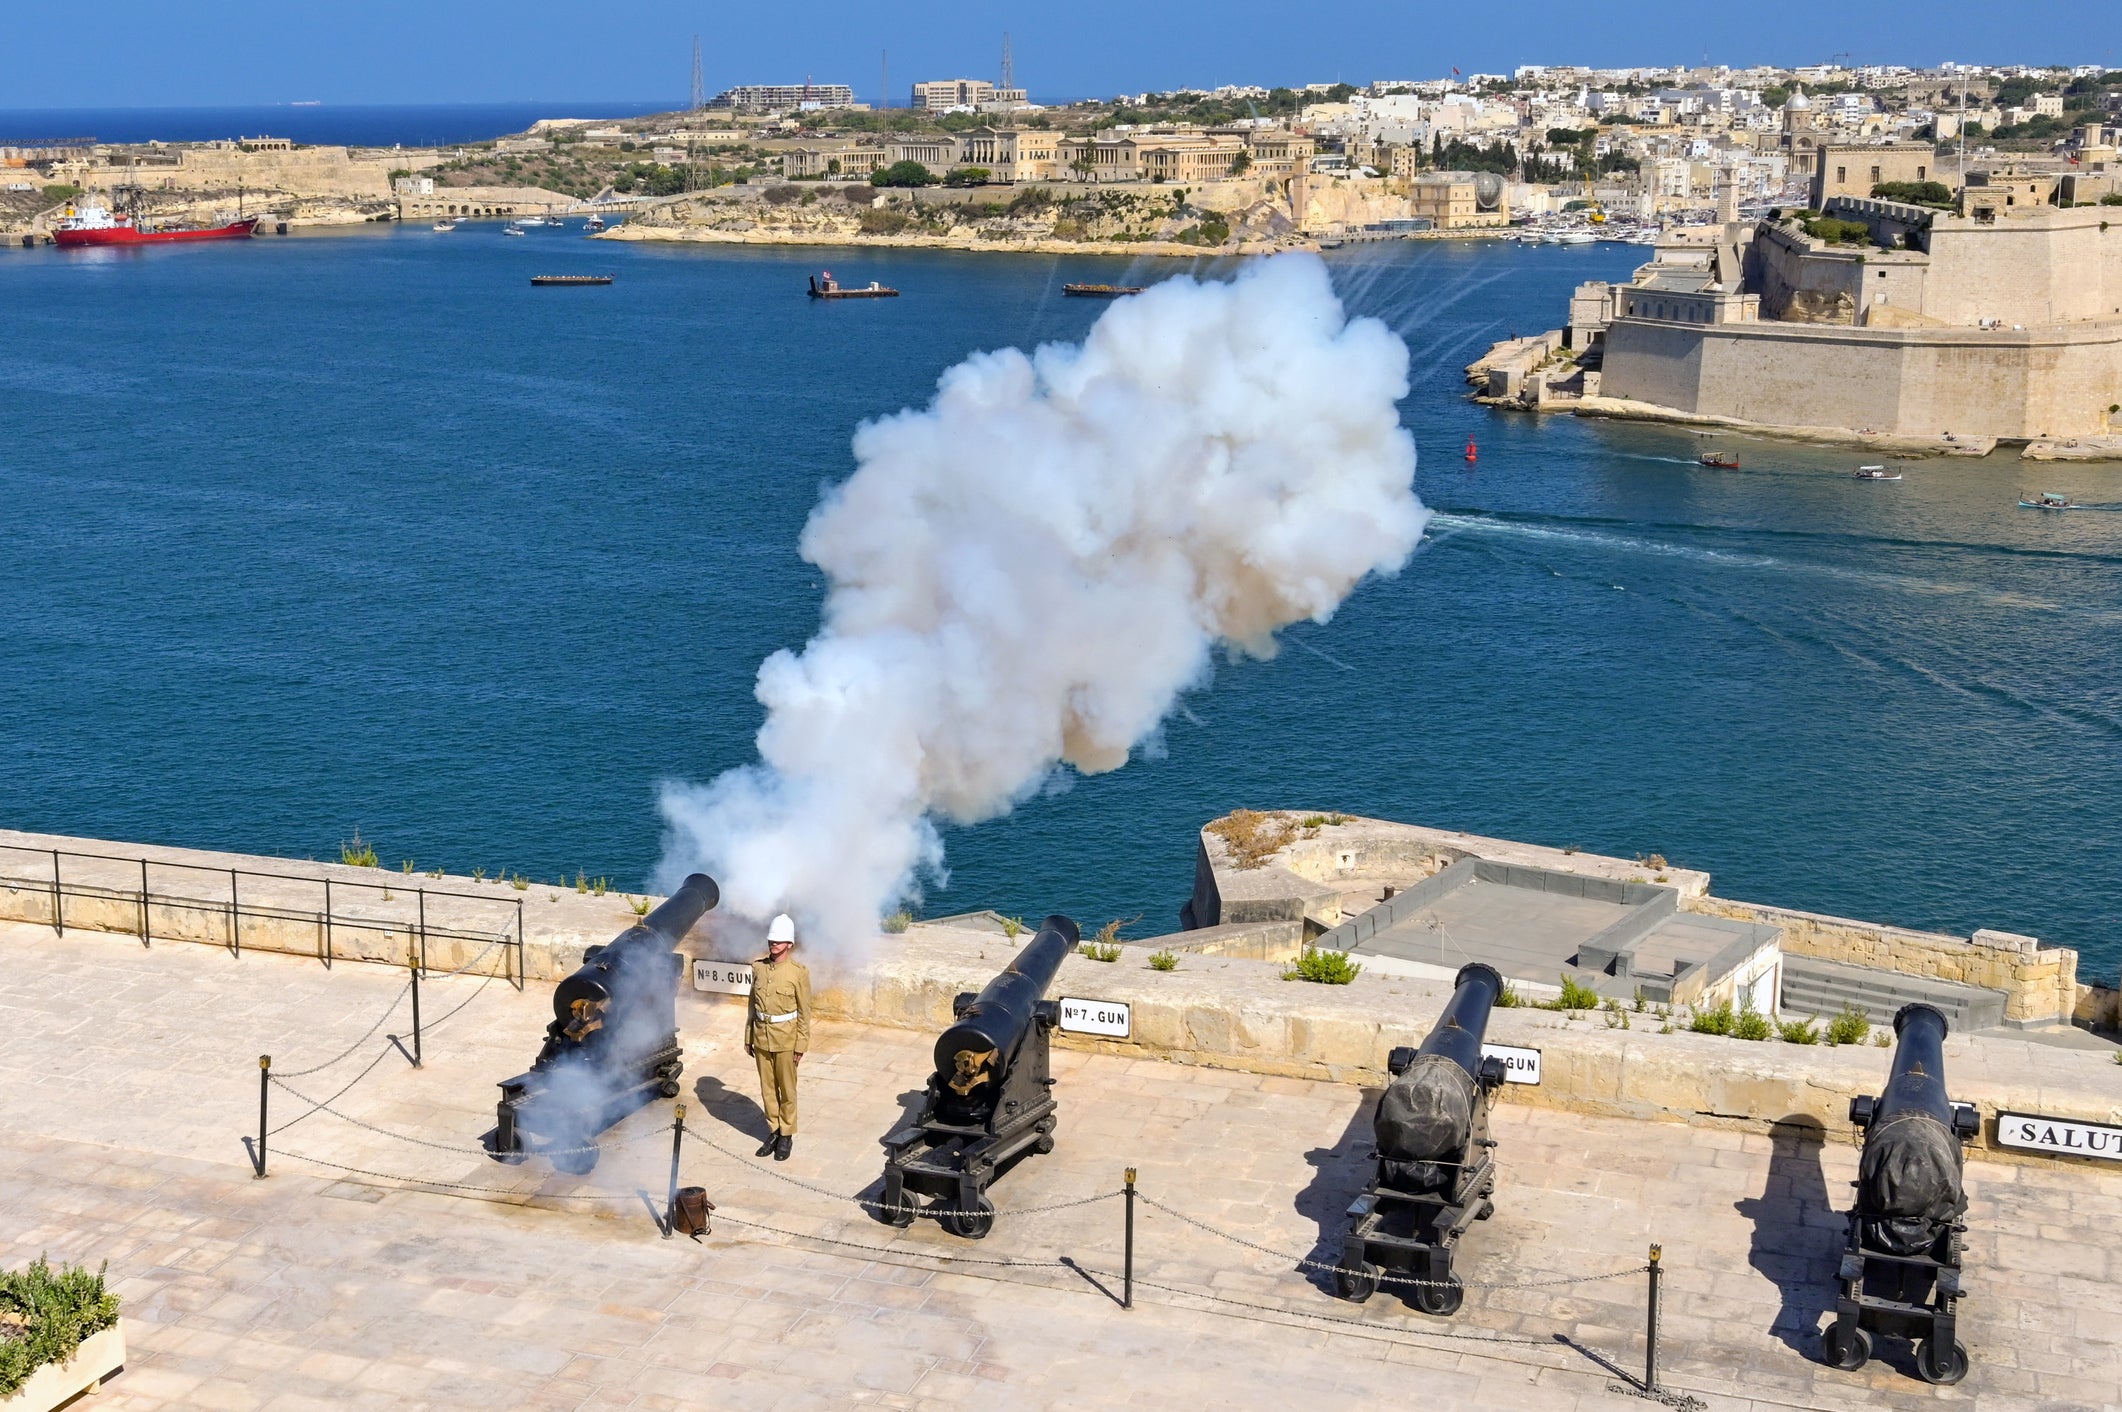 The cannon fires Monday through Saturday in an ode to past salutes of visiting naval vessels